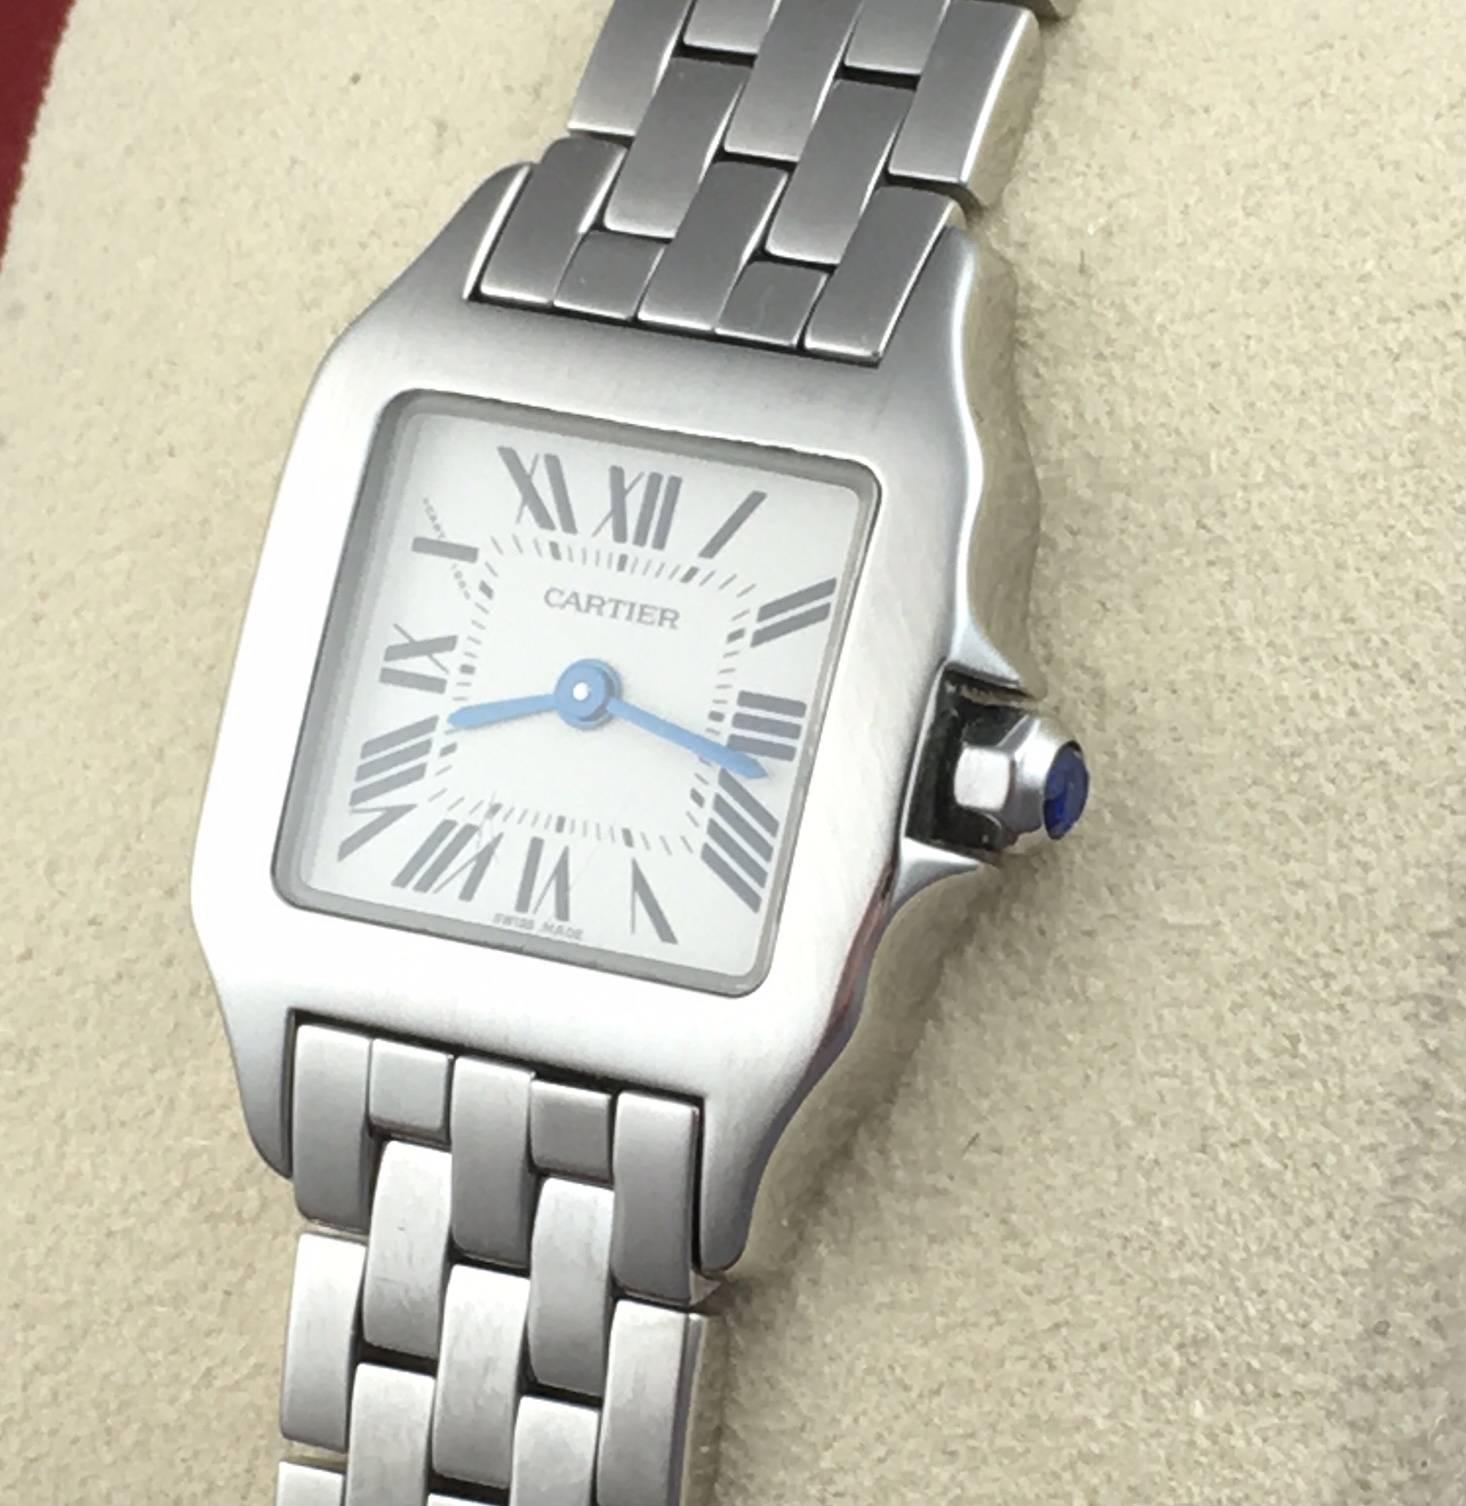 Cartier Ladies Santos DeMoiselle Model W2510002 Stainless Steel Wrist Watch.  Quartz movement.  Stainless Steel square style case with blue sapphire cabachon setting crown (20x28mm). Water Resistant to 30 Meters - 100 Feet. Stainless Steel bracelet